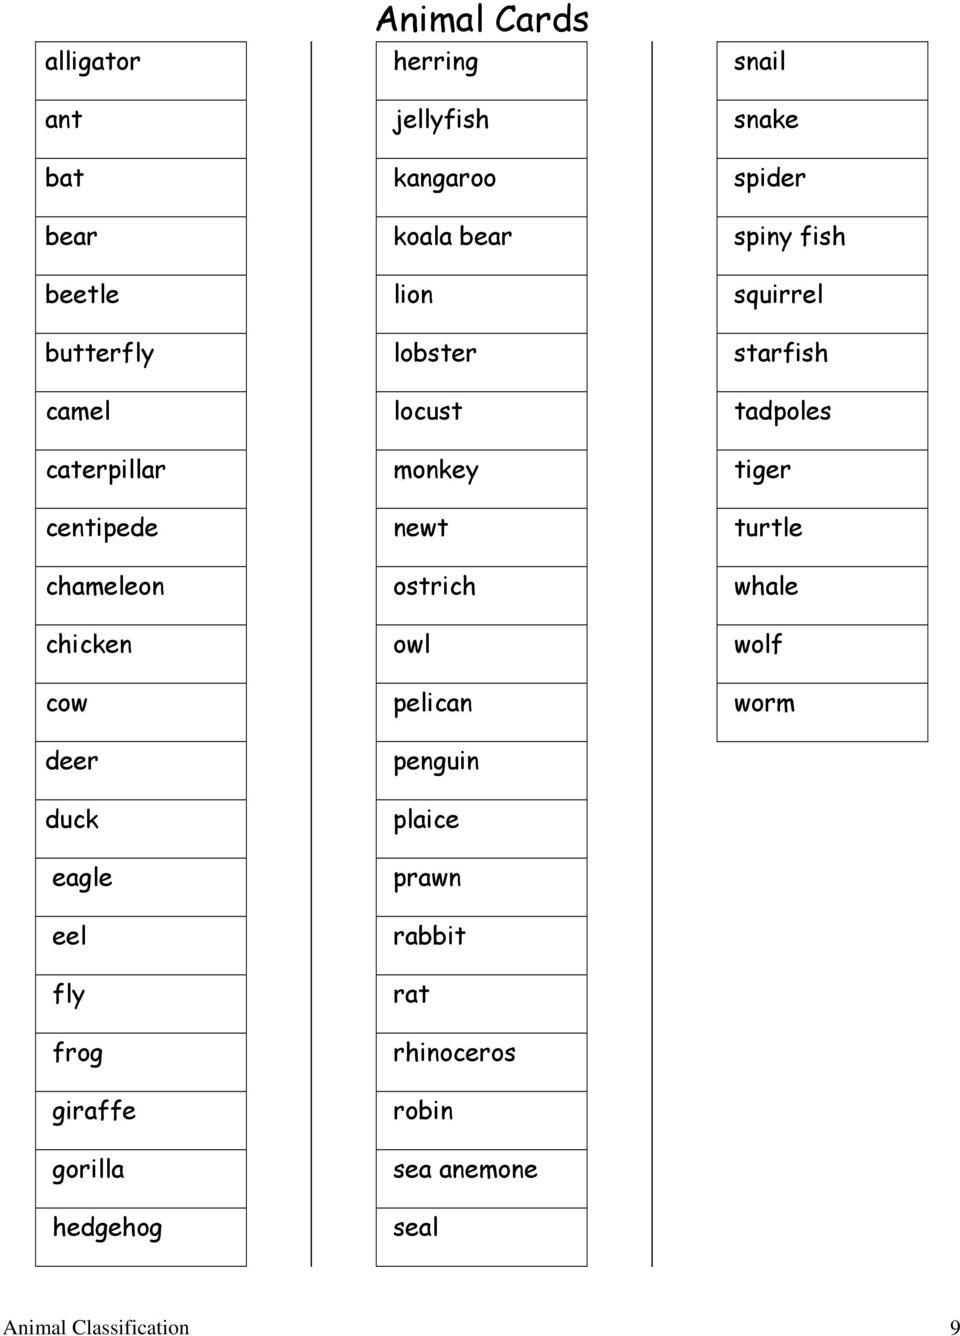 Animal Classification. Contents. Preparation - PDF Free Download